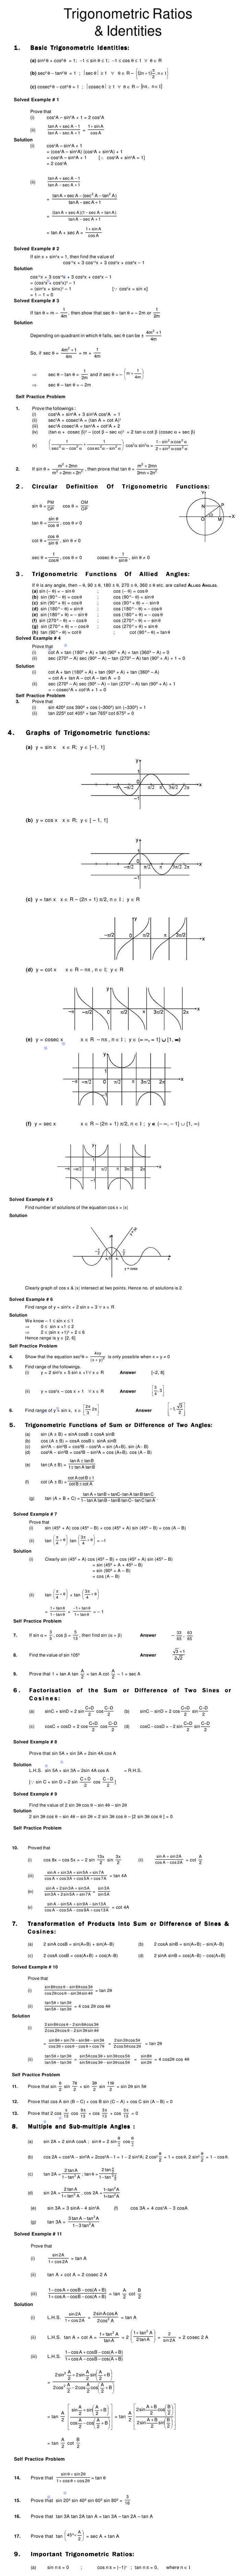 Maths Study Material - Chapter 24